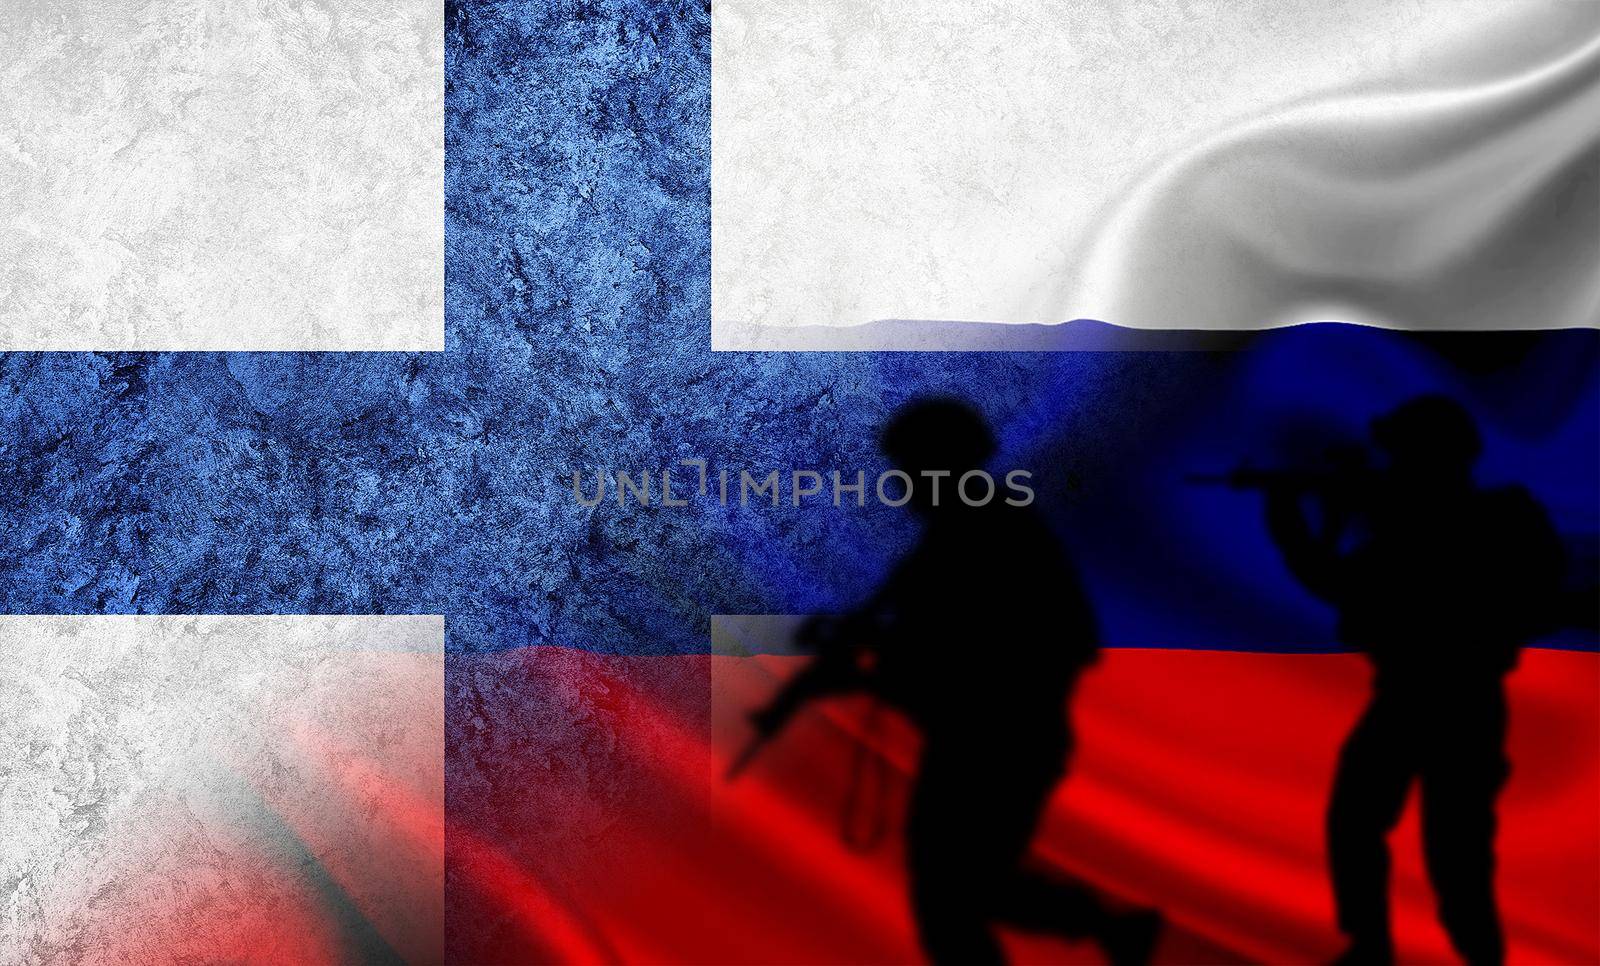 Russia vs Finland flag, concept of war between Russia and Finland, silhouette of soldiers on russia vs finland flag, cracked wall with russia and finland flag, confrontation between russia vs finland by isaiphoto